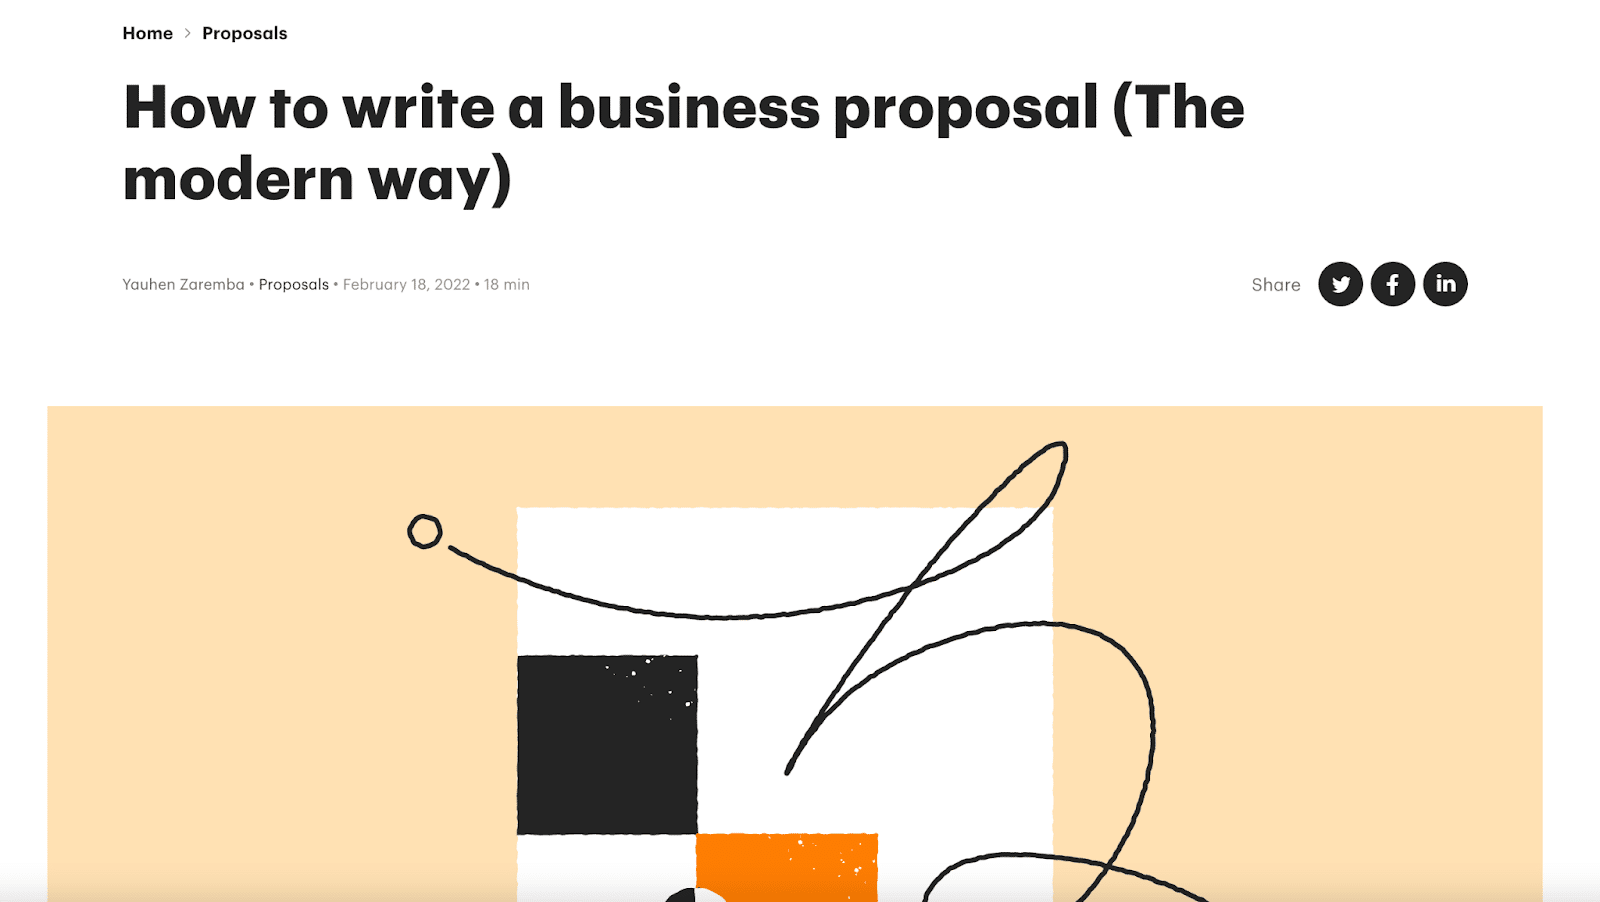 Topic: How to write a business proposal for SaaS